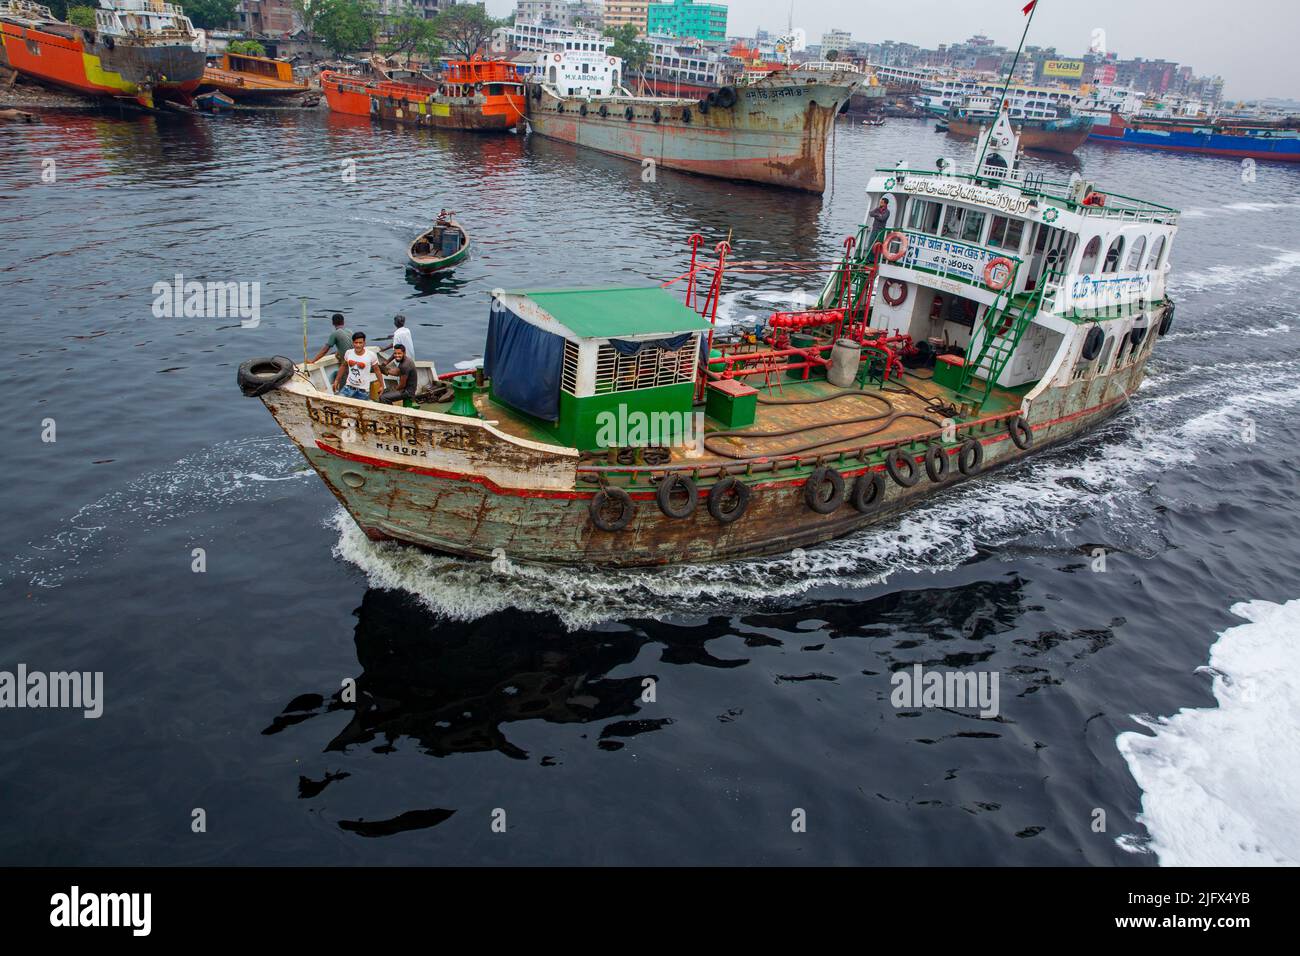 A small oil tanker on the polluted water of Buriganga River, Dhaka, Bangladesh Stock Photo